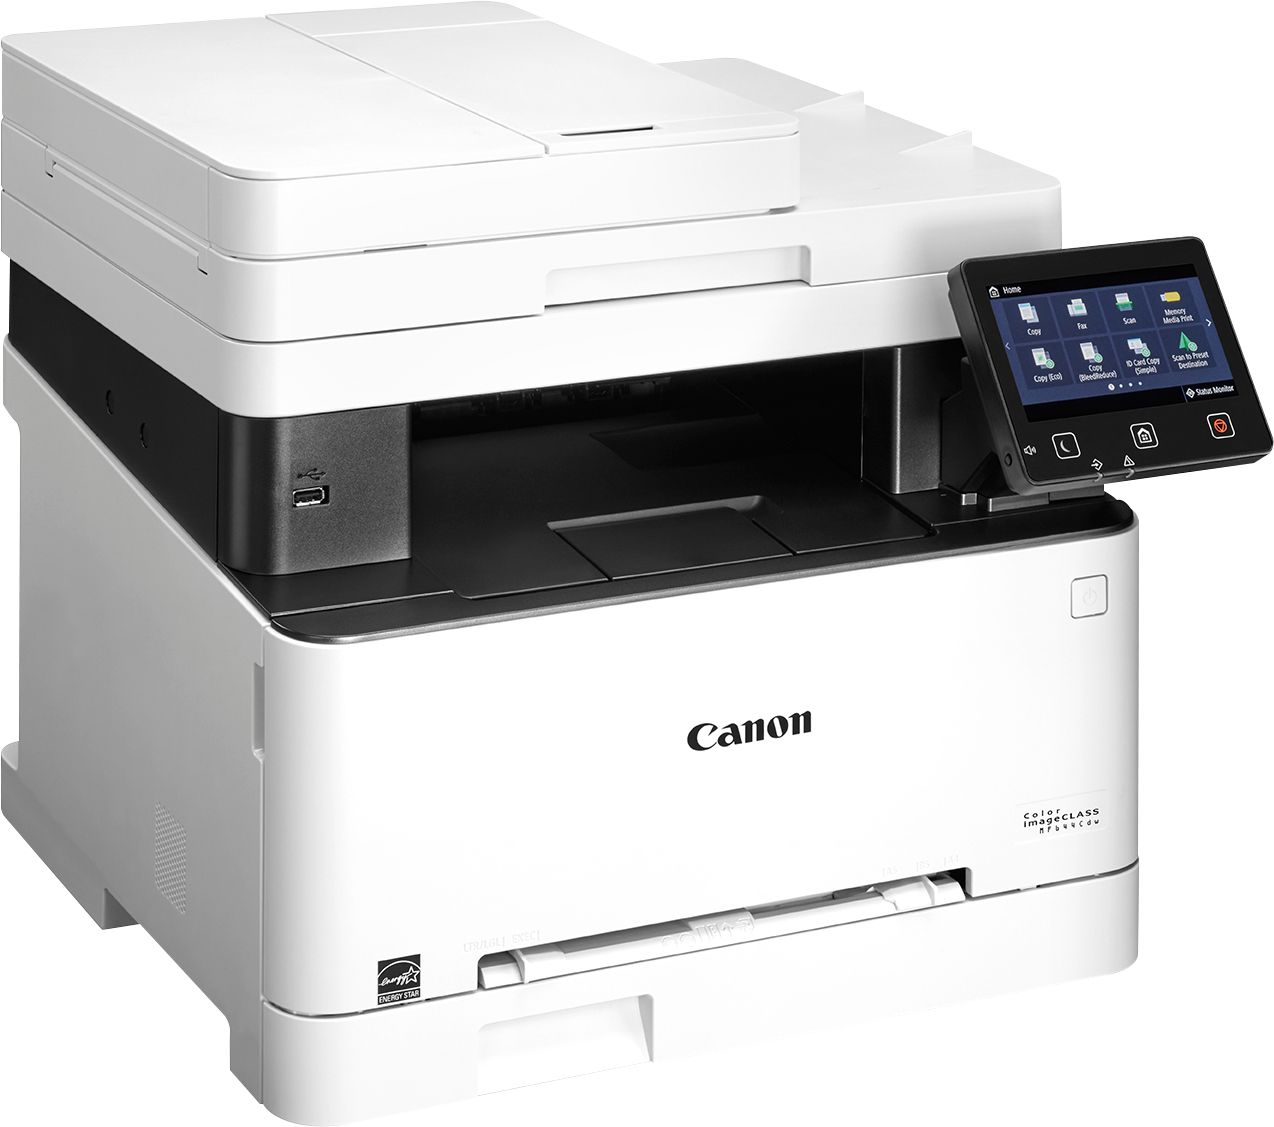 Angle View: Canon - imageCLASS MF741Cdw Wireless Color All-In-One Laser Printer - White